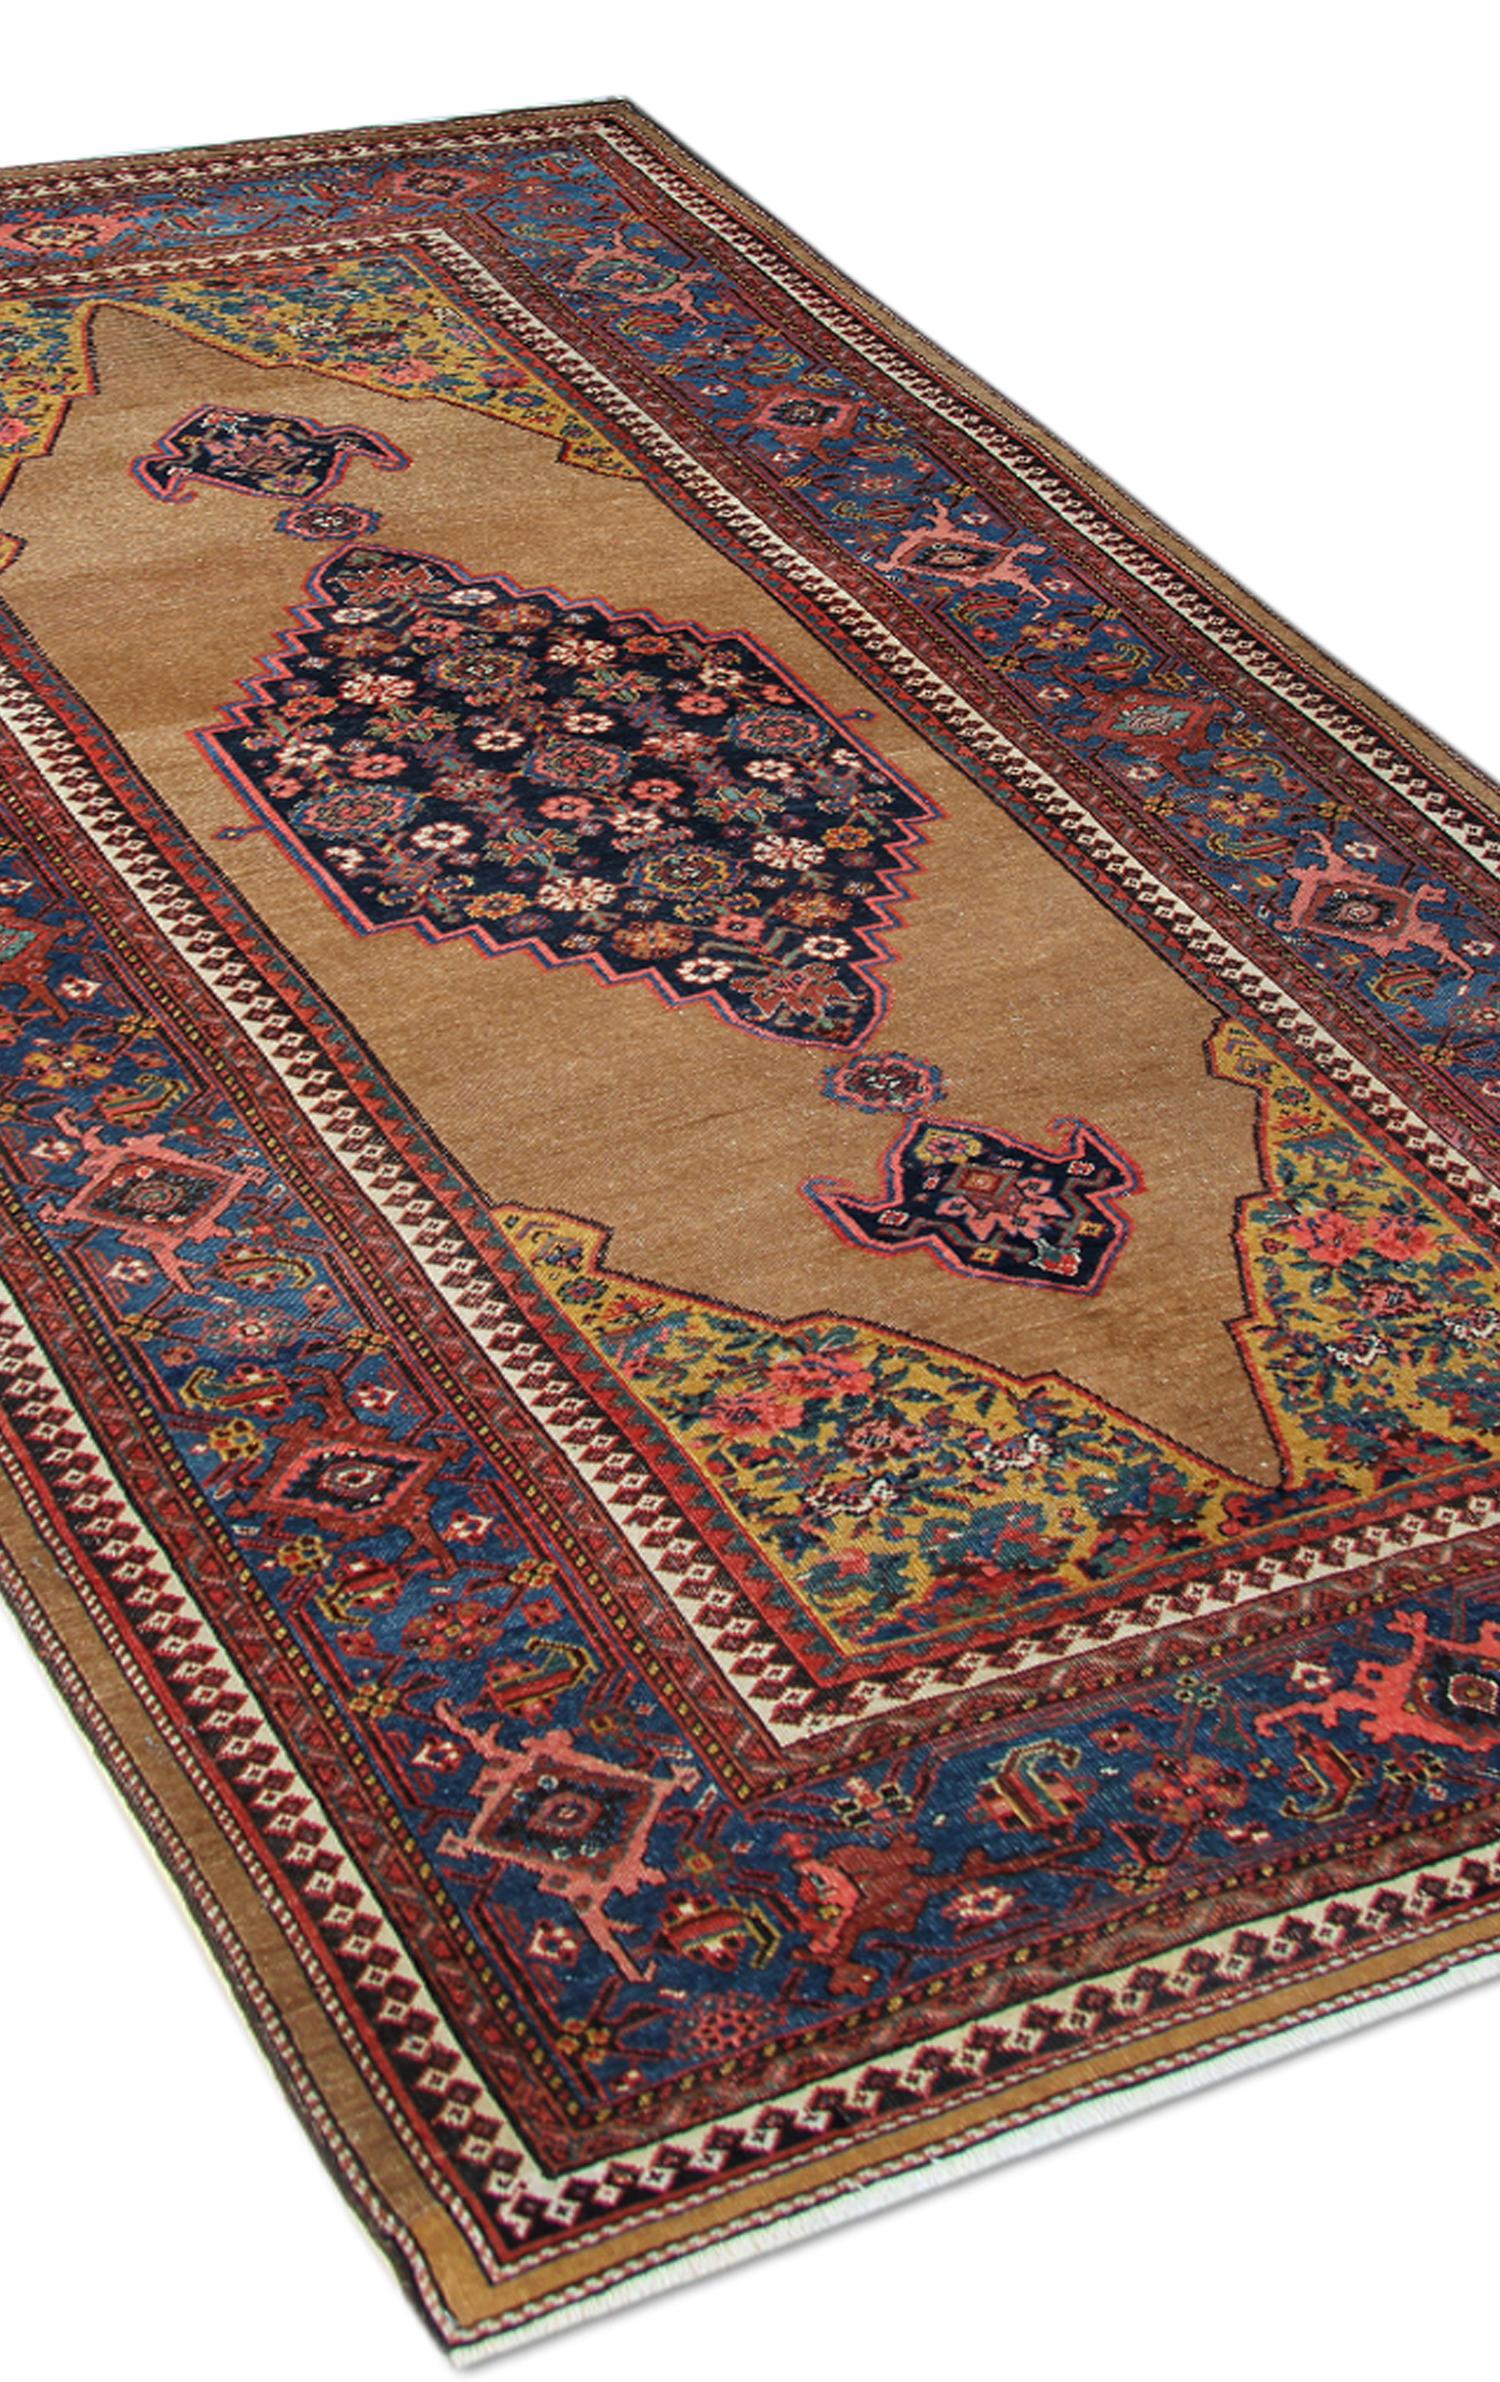 Early 20th Century Handwoven Carpet Rug Geometric Oriental Area Rug Traditional Gold Rug For Sale